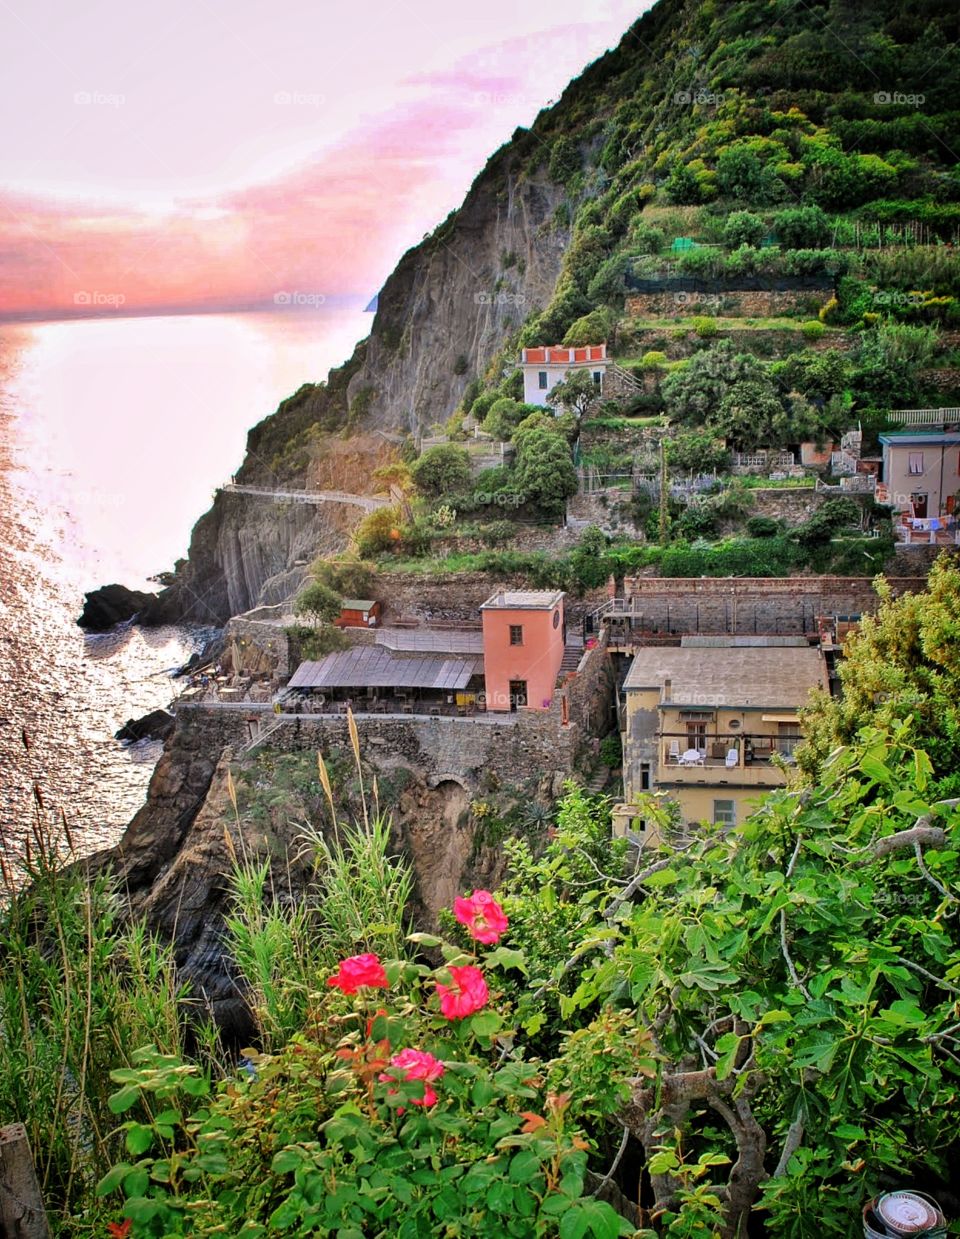 Sunset on the Cinque Terre